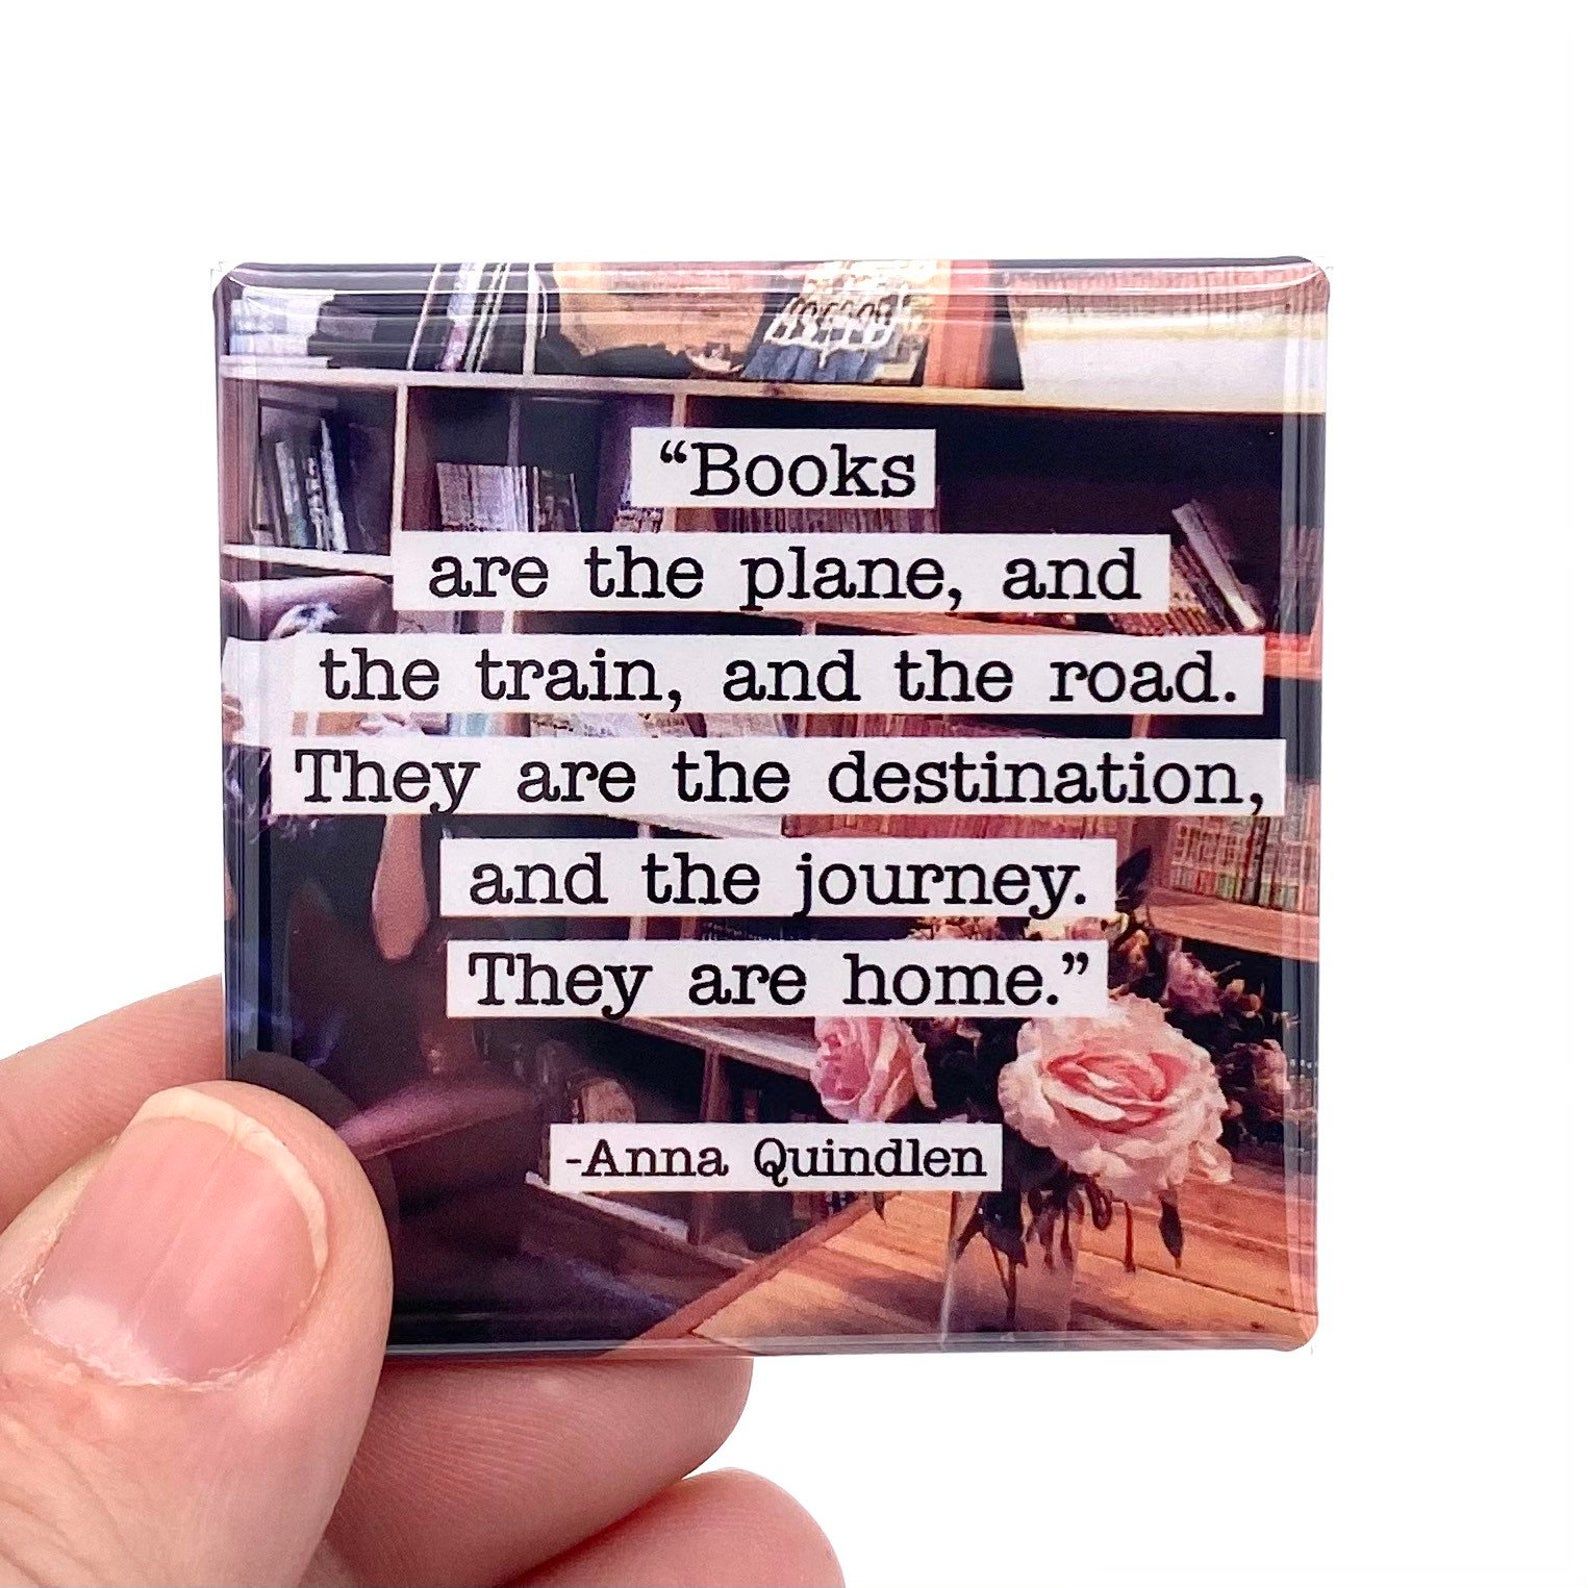 A square refrigerator magnet with an image of bookshelves and the quote from Anna Quindlen printed over it.